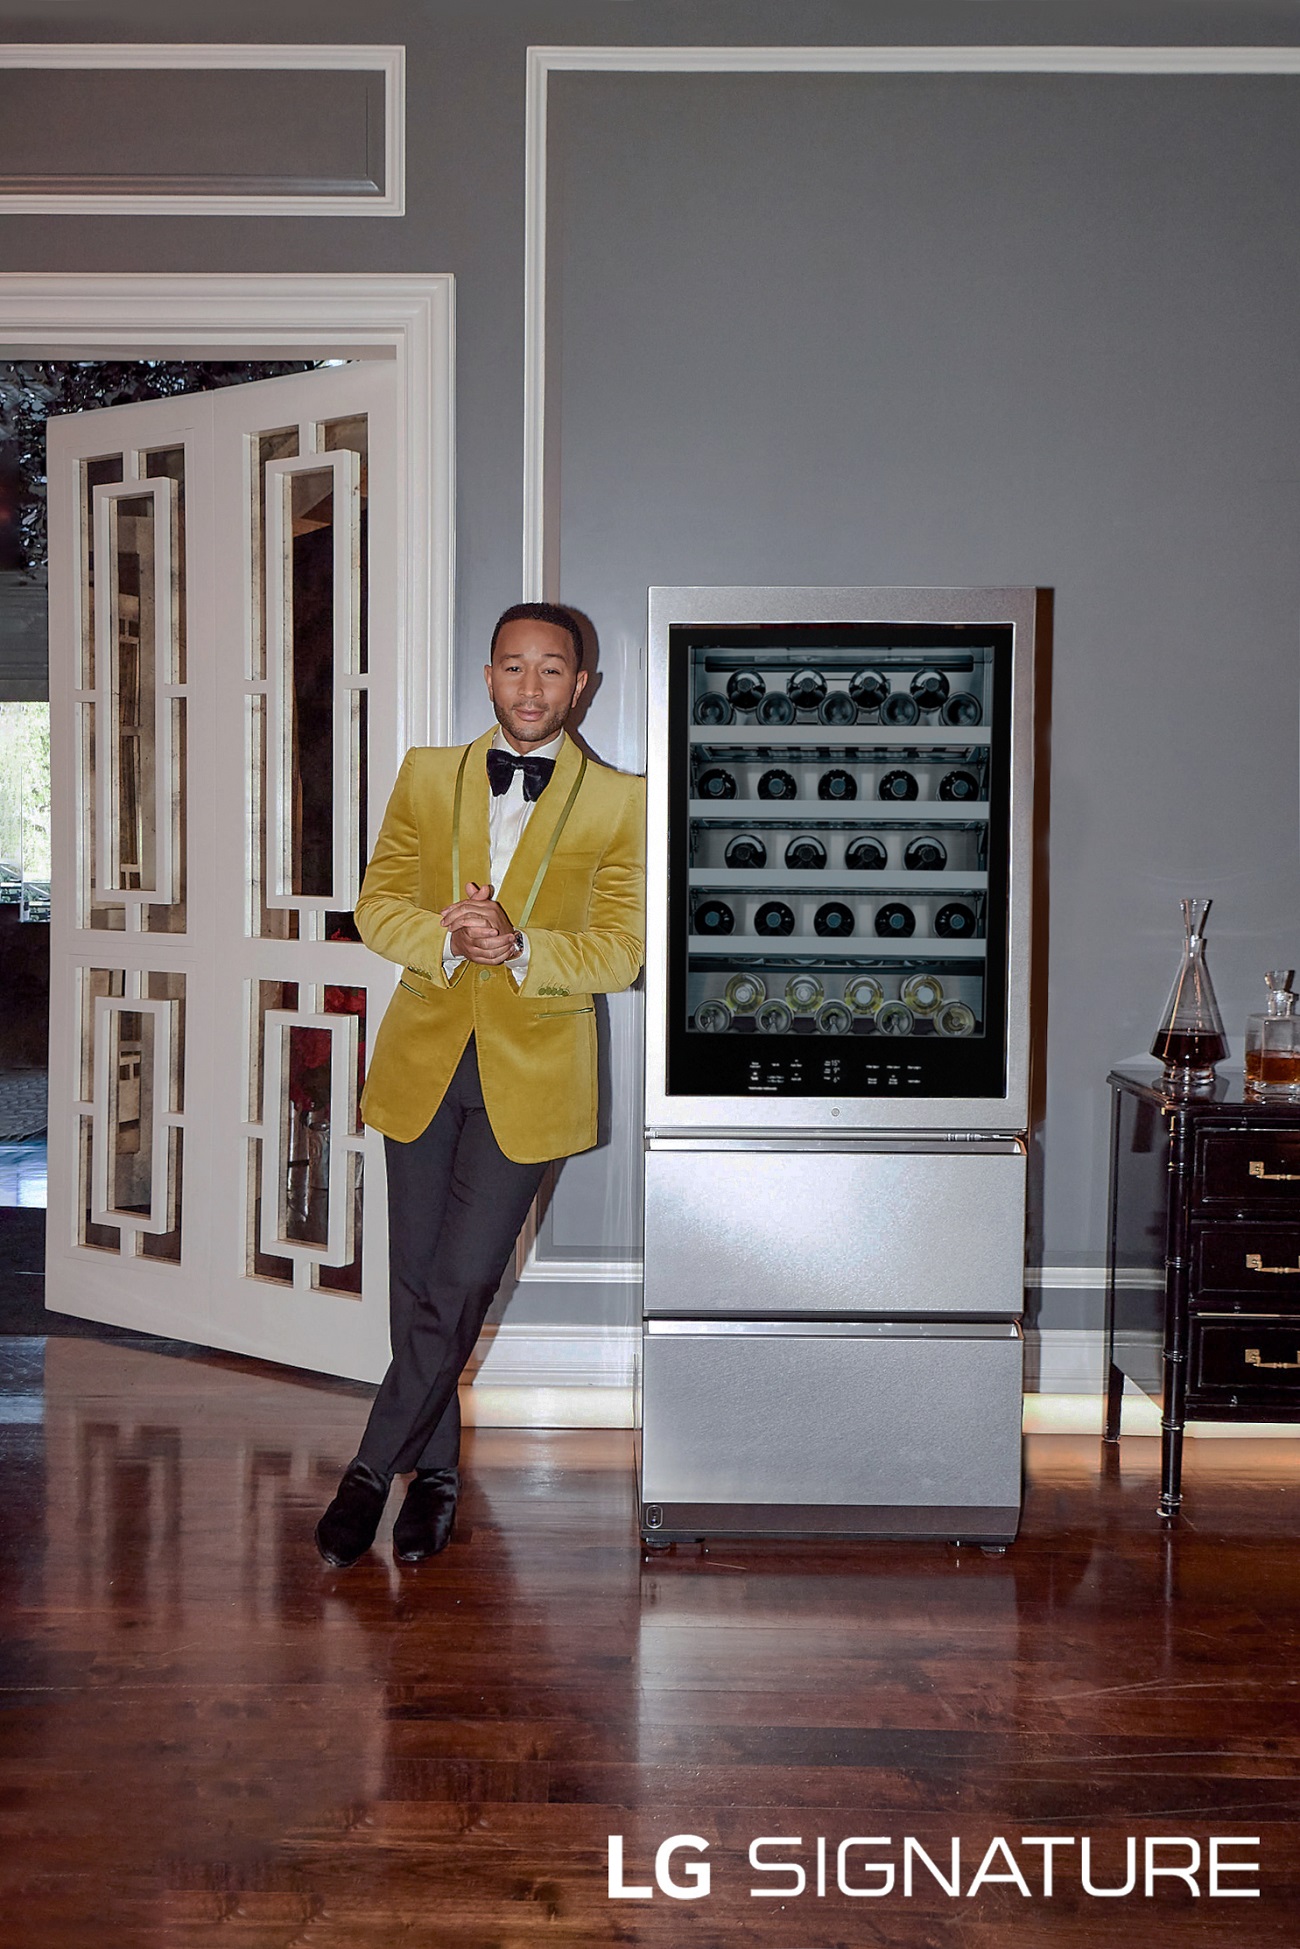 An image of John Legend leaning against LG SIGNATURE Wine Cellar